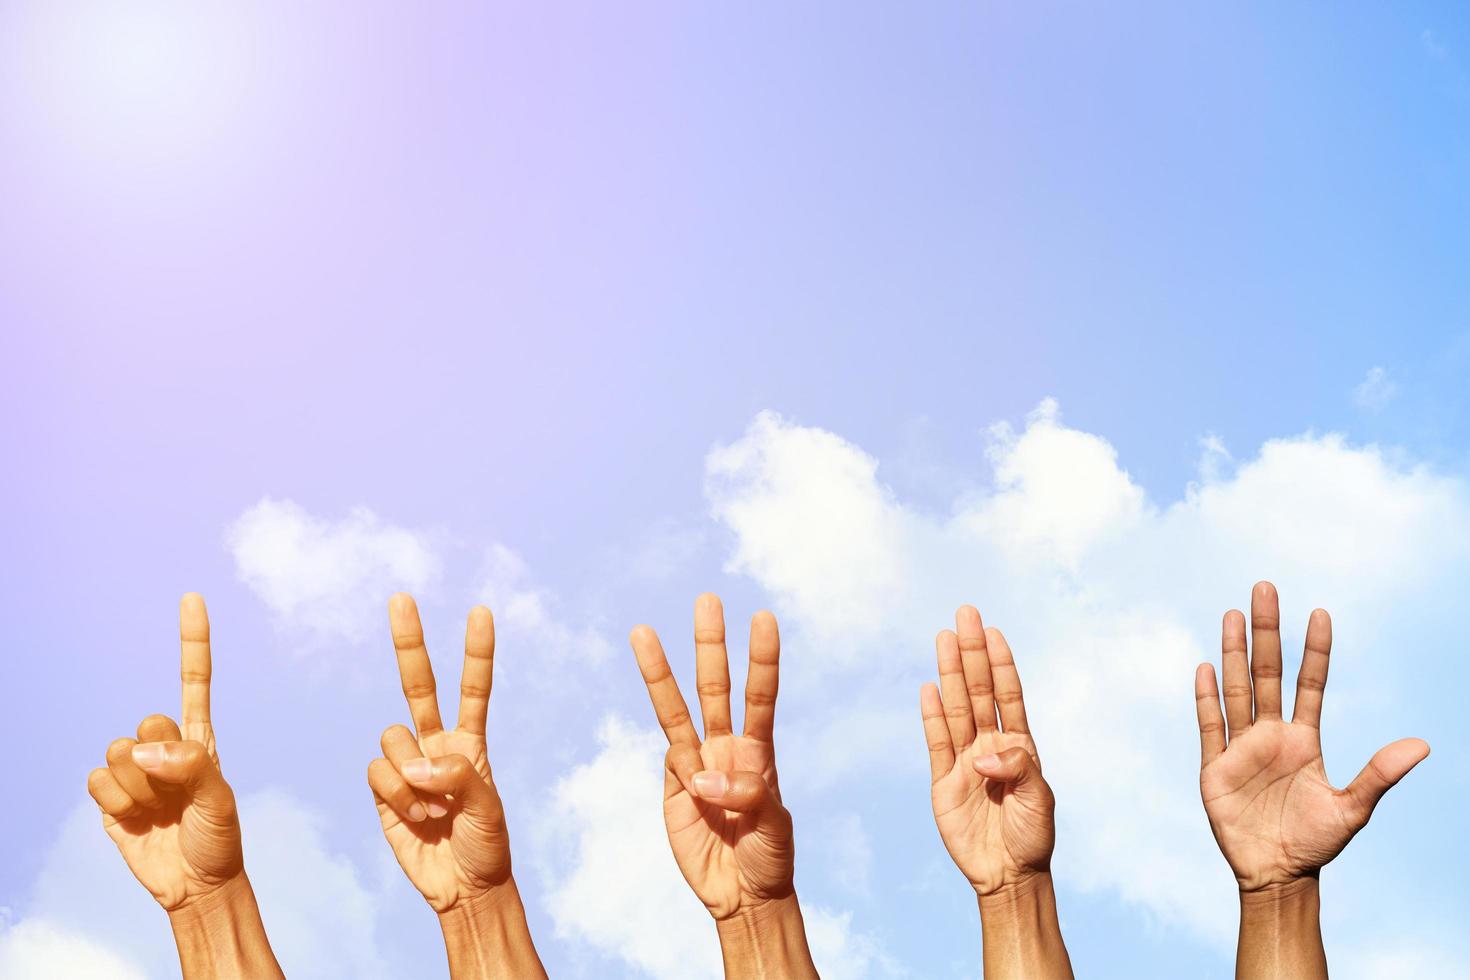 Set of hands counting from one to five behind of fresh air with blue sky and clouds background with copy space for wallpaper or banner photo